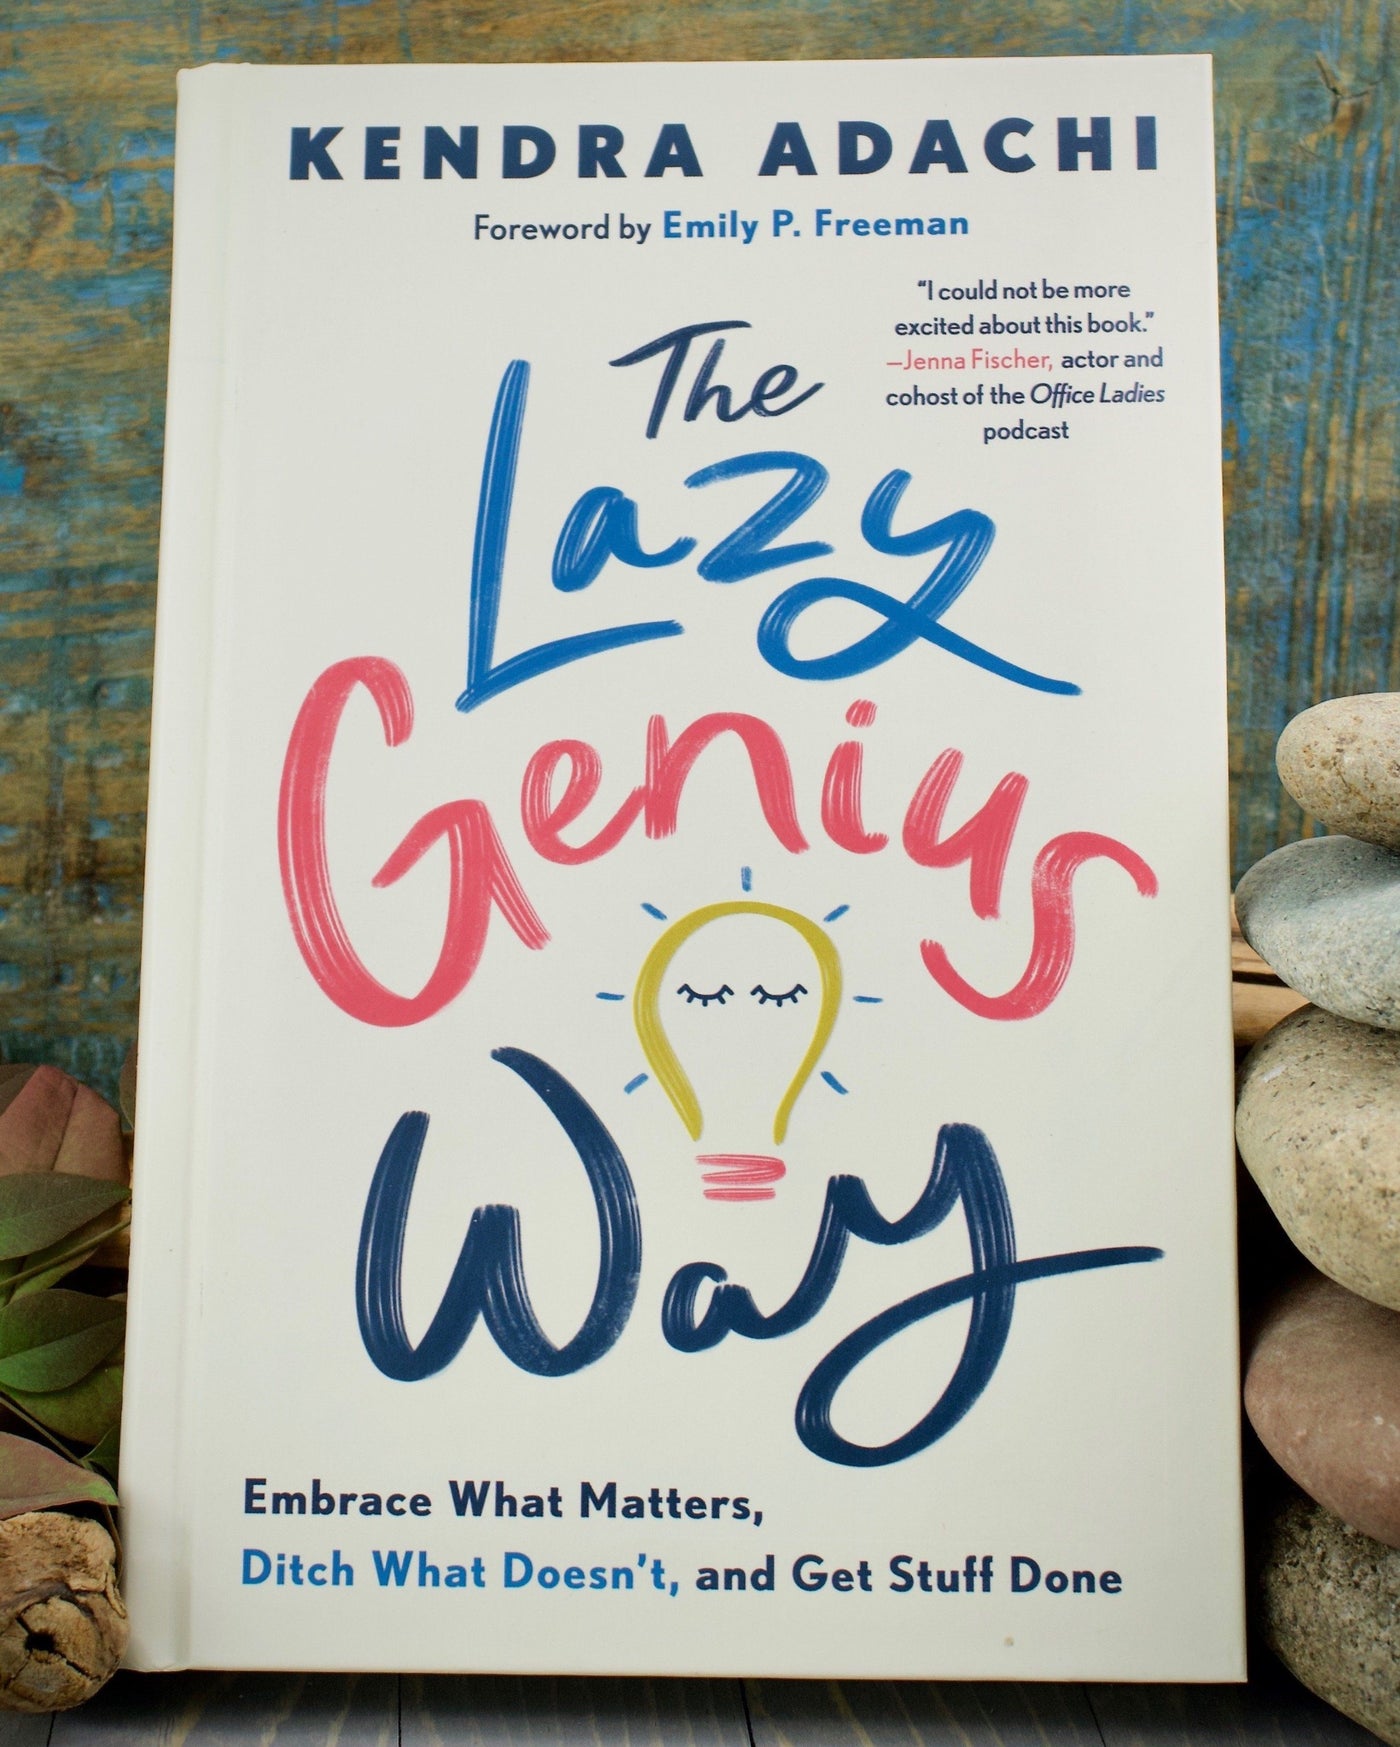 The Lazy Genius Way: Embrace What Matters, Ditch What Doesn't and Get Stuff Done